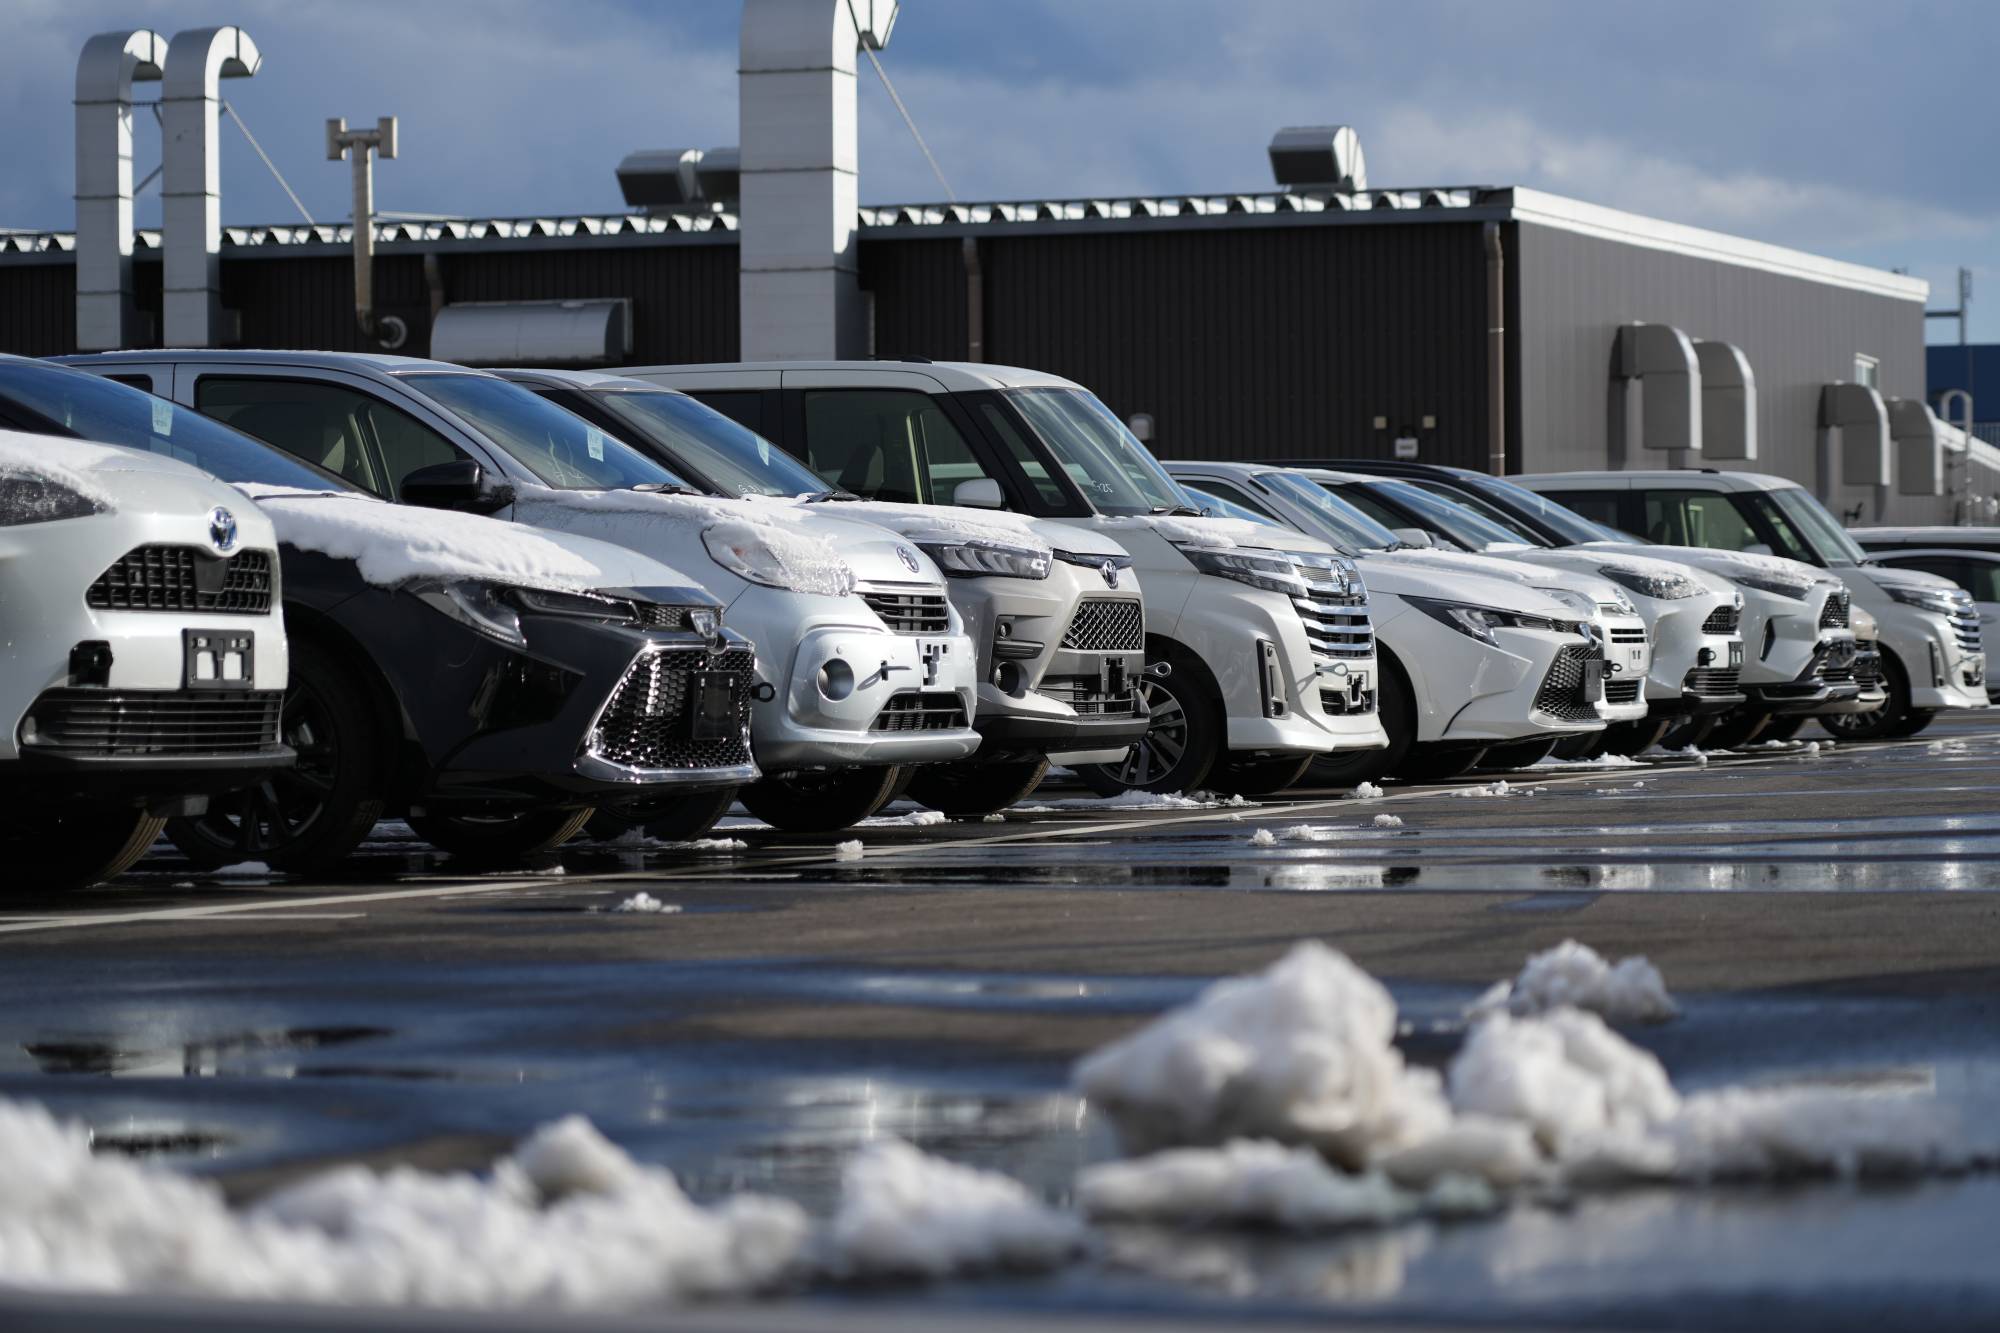 Toyota Motor Corp. vehicles parked at a company dealership in Sendai on Feb. 5. The pandemic has disrupted global supply chains, causing shortages of critical products. | BLOOMBERG